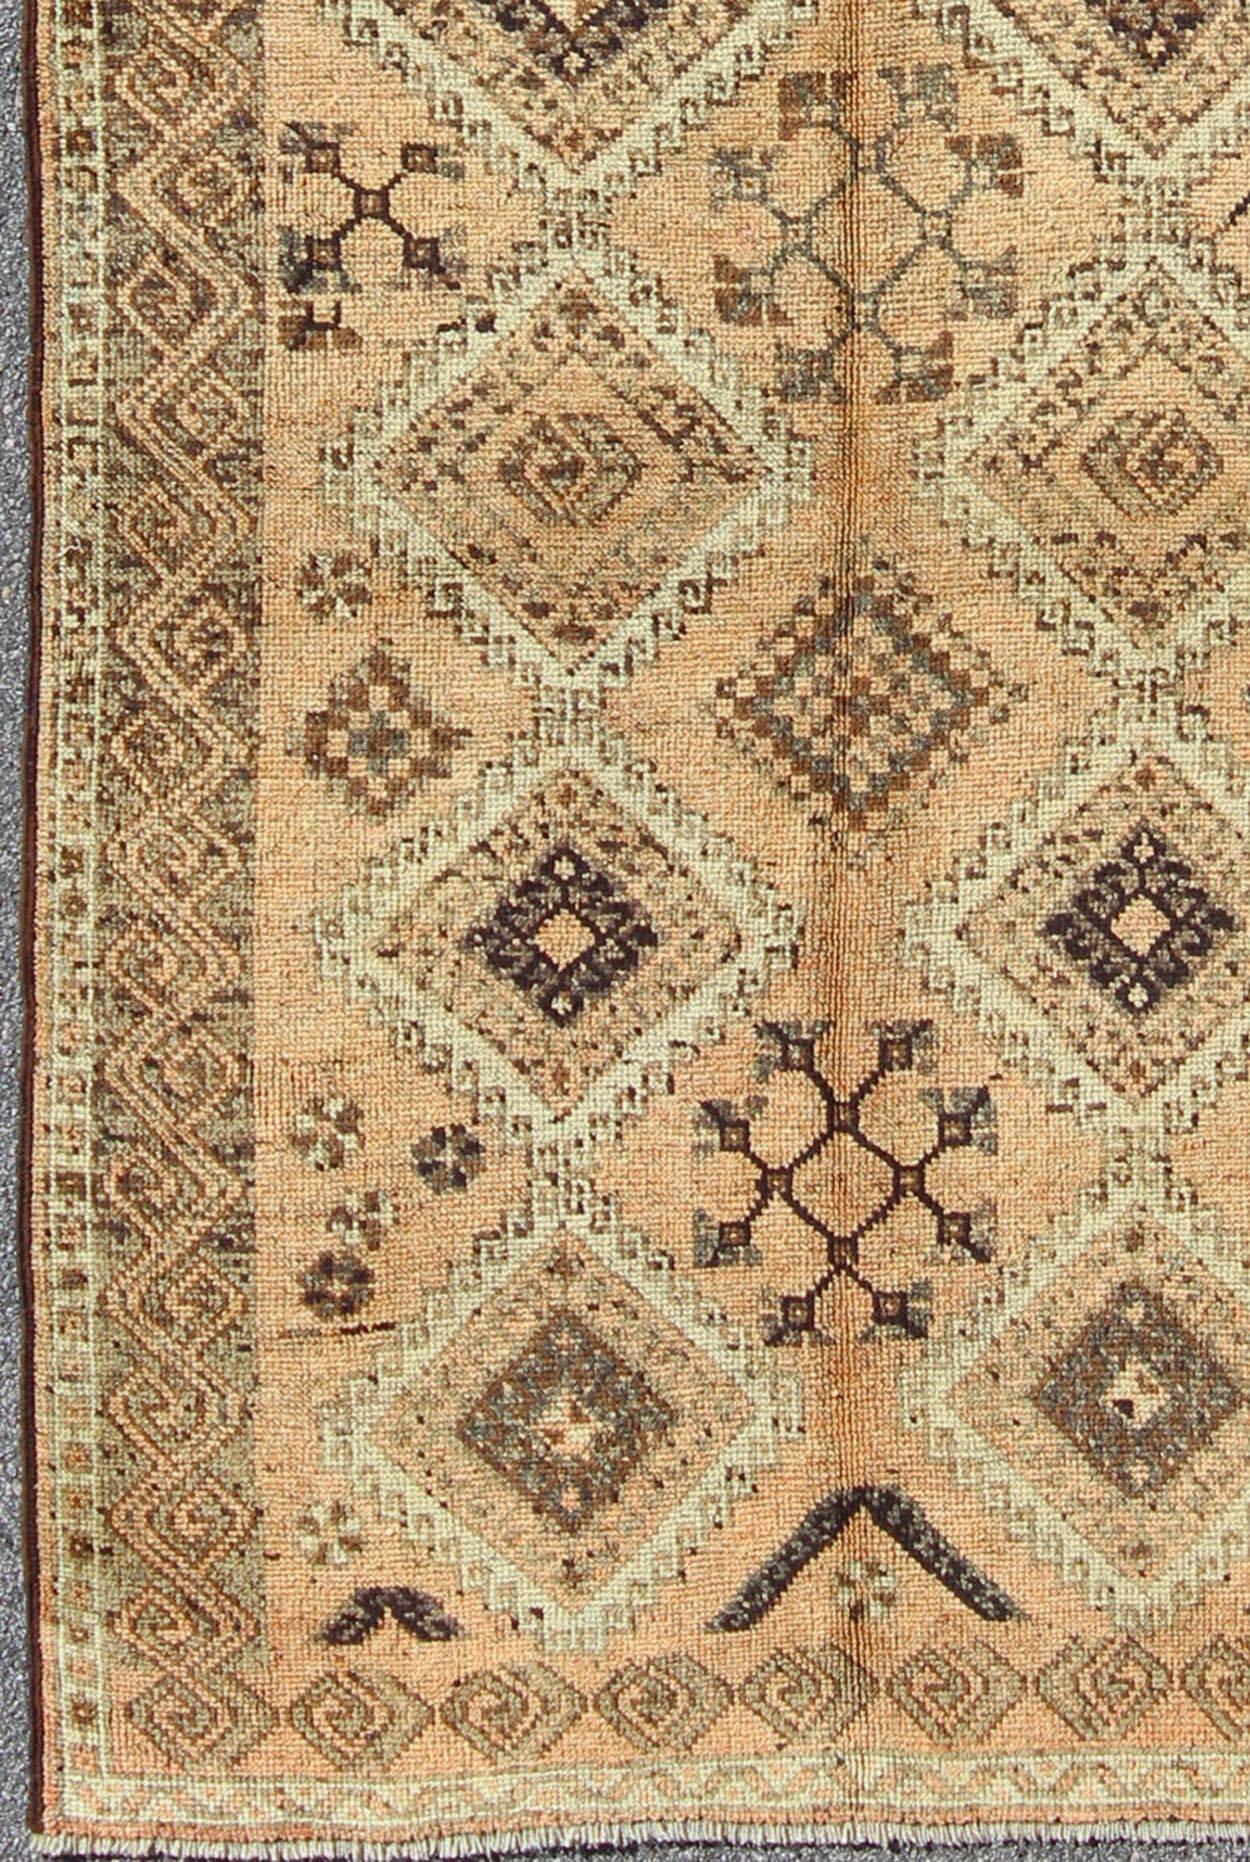 Vintage Tribal Turkish wide runner  with Repeating Diamond & Geometric Motifs   Rug/TU-SIM-26, Vintage tribal rug, Moroccan rug, vintage Moroccan
This vintage Turkish wide runner features a unique blend of colors and an intricately beautiful design.